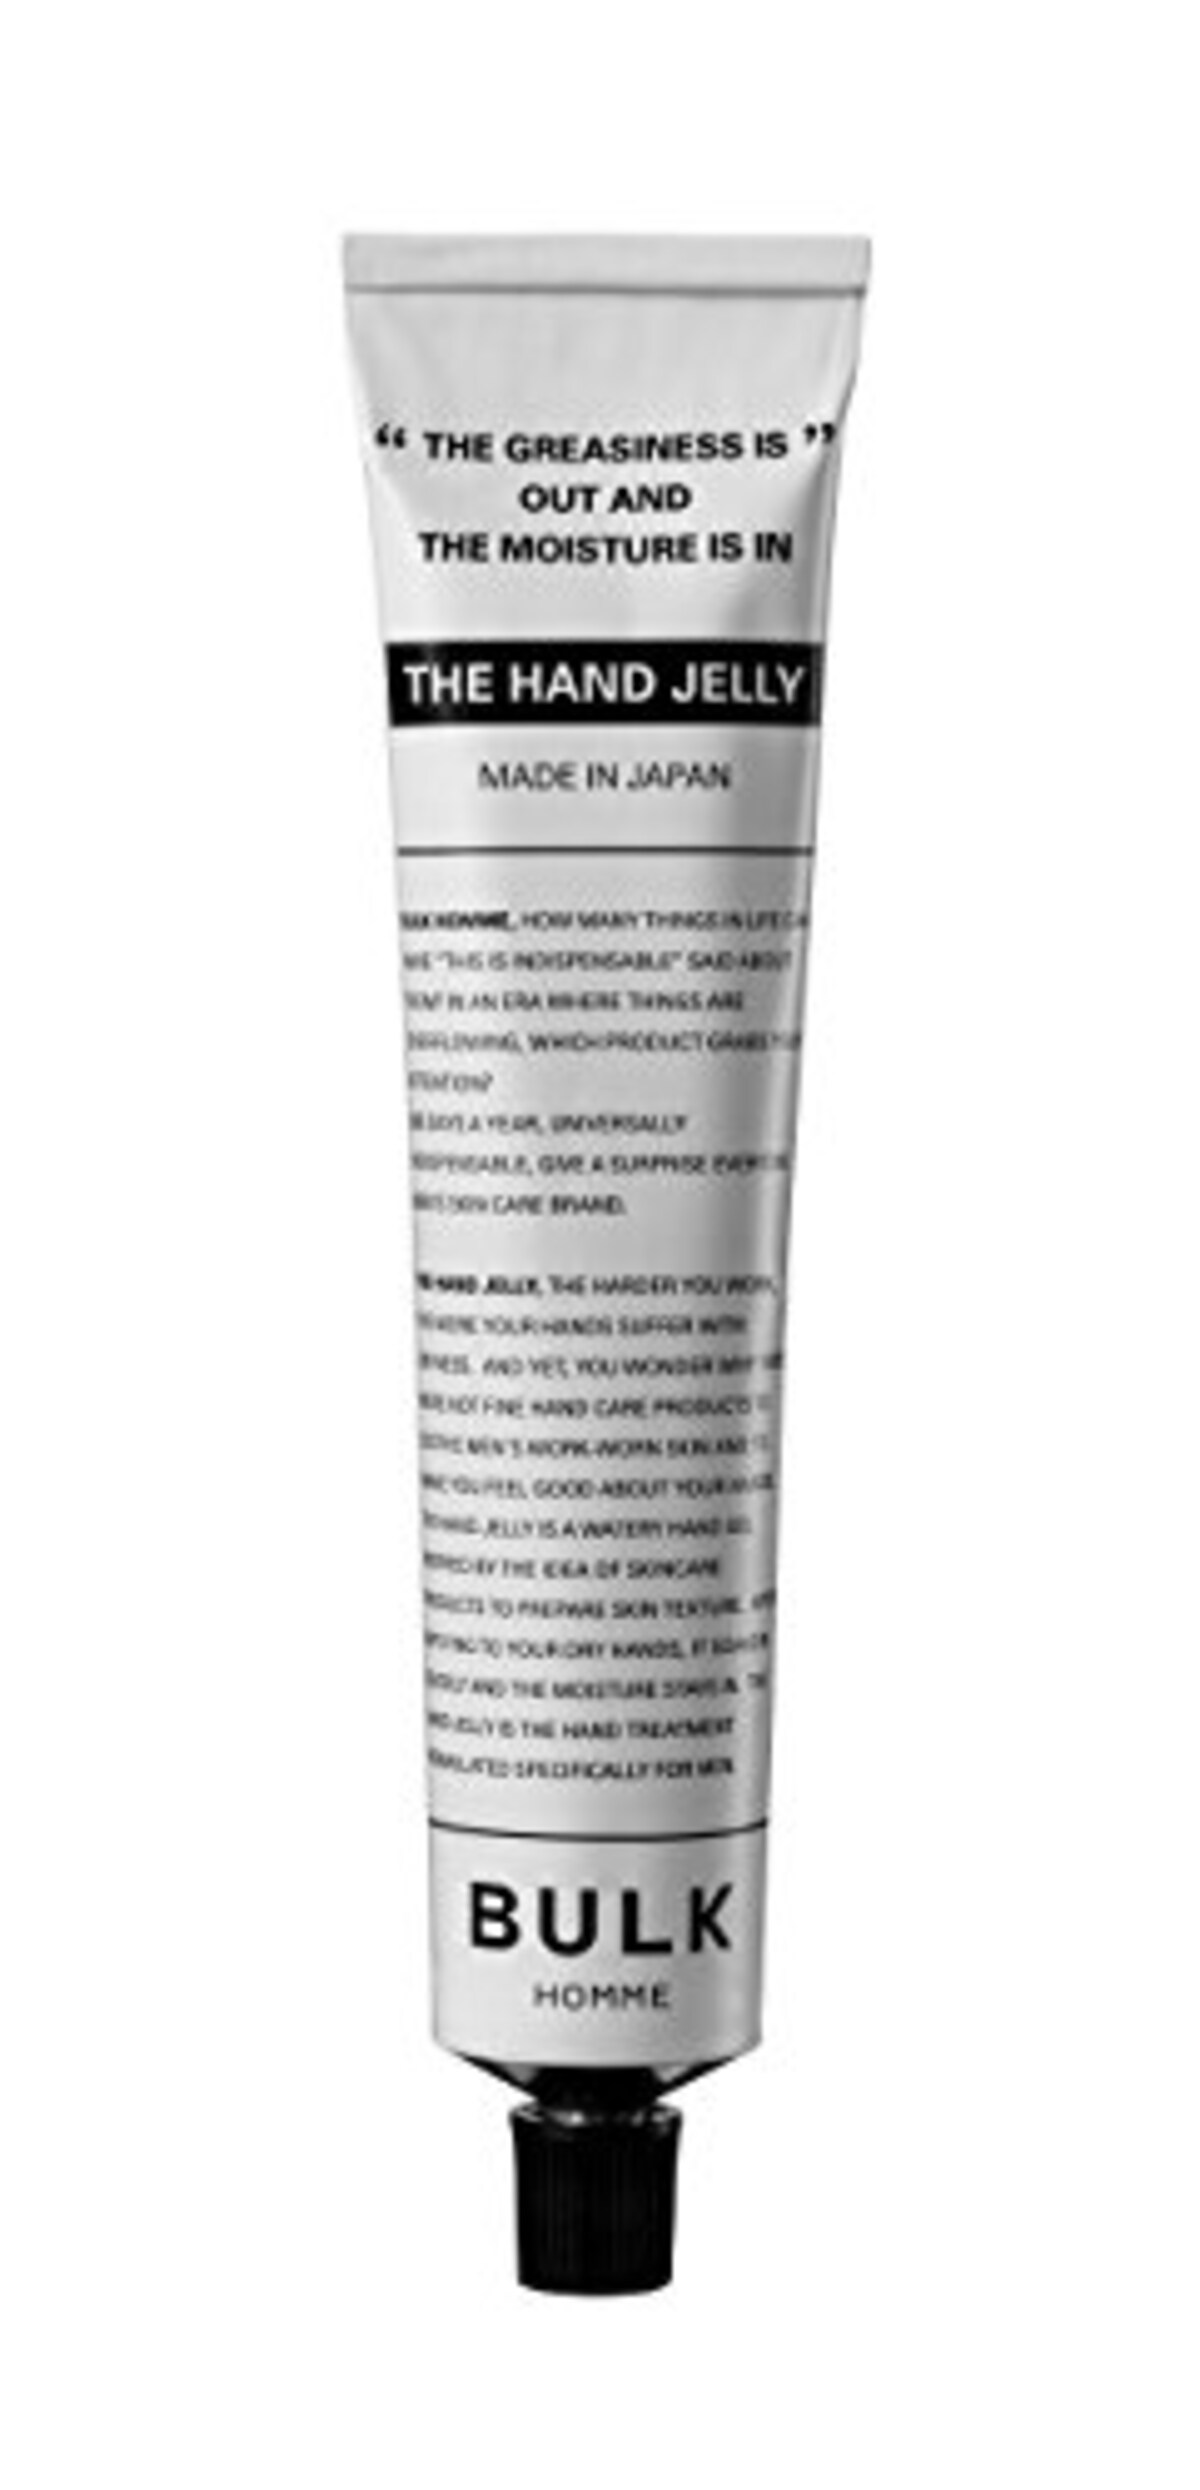 THE HAND JELLY